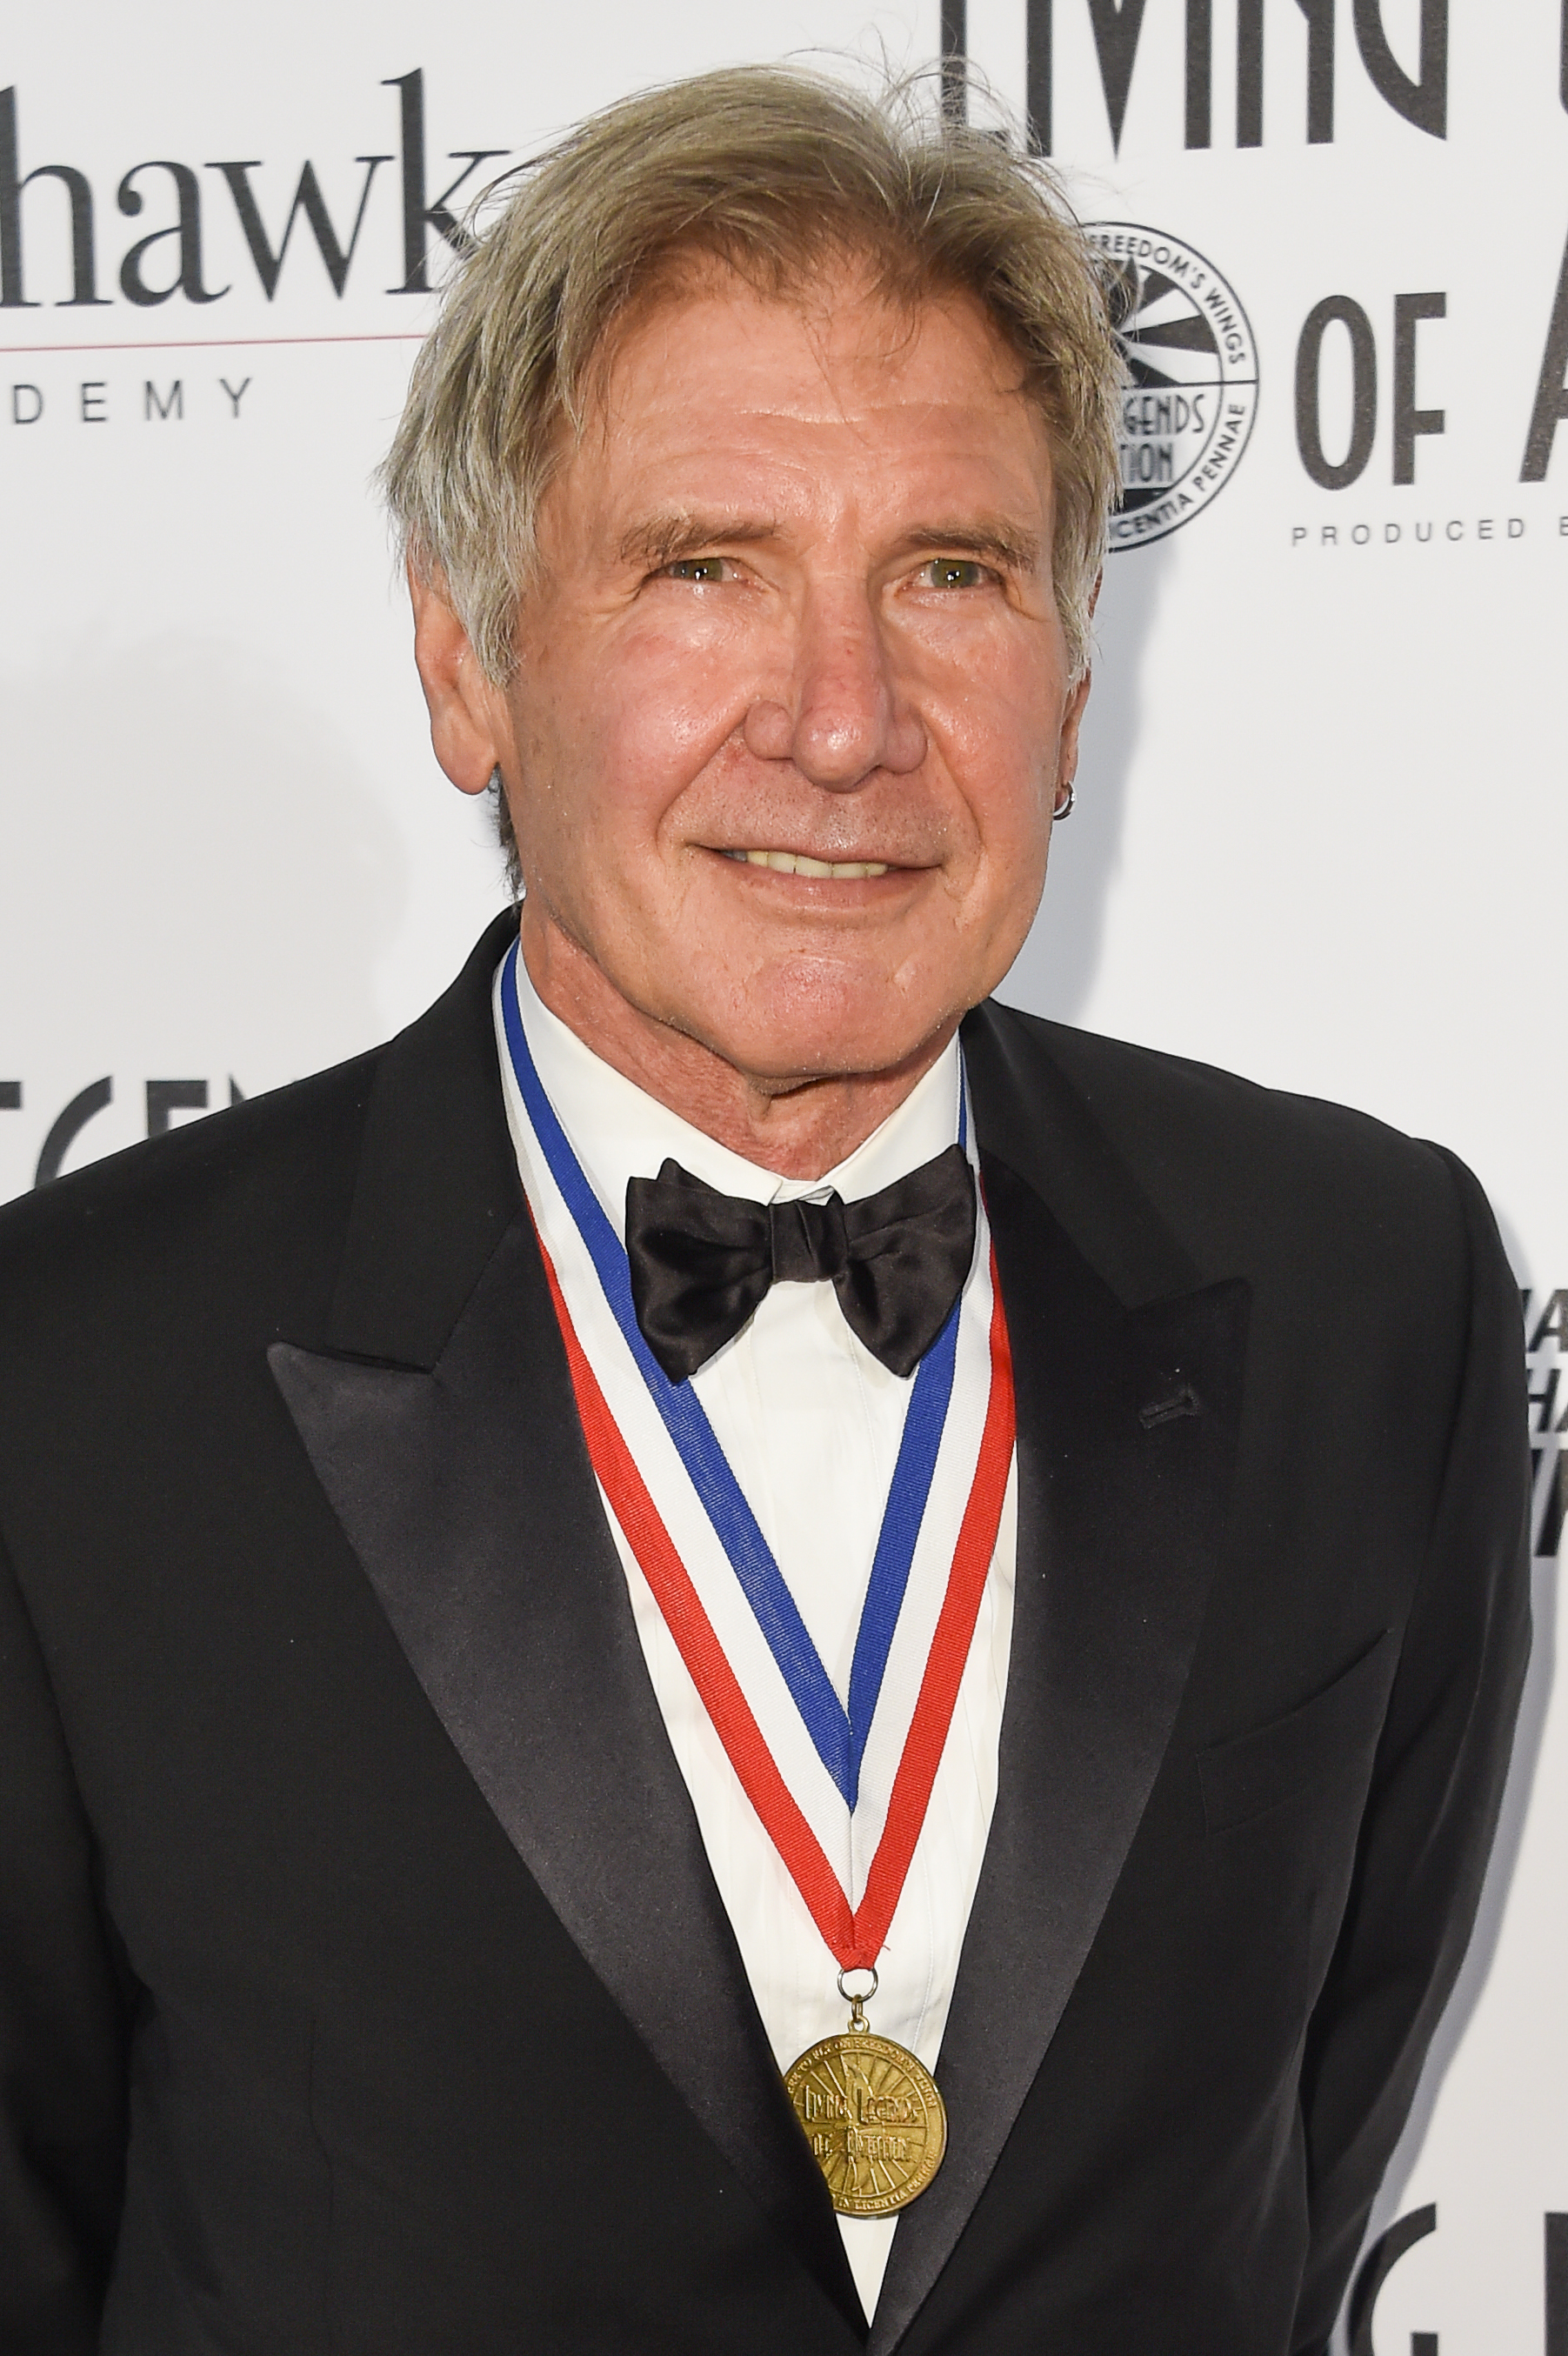 Harrison Ford attends the 12th Annual Living Legends of Aviation Awards in Los Angeles on Jan. 16, 2015. (Rob Latour—AP)